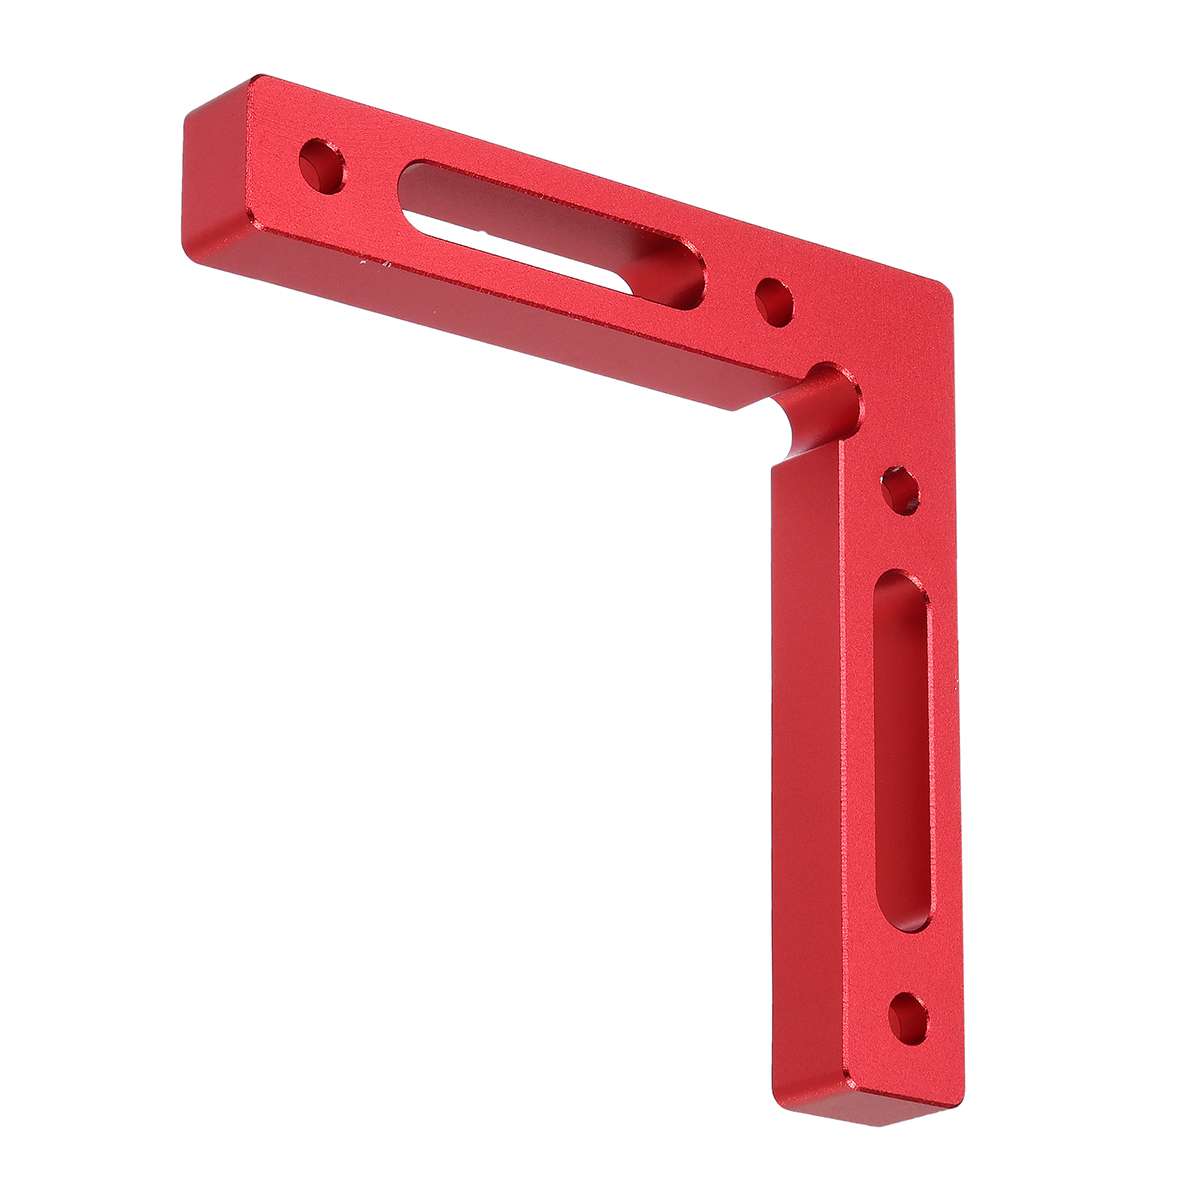 L-Shape-Clamp-90-Degree-Square-Right-Angle-Corner-Wood-Metal-Welding-Multifunctional-Tools-1543730-5